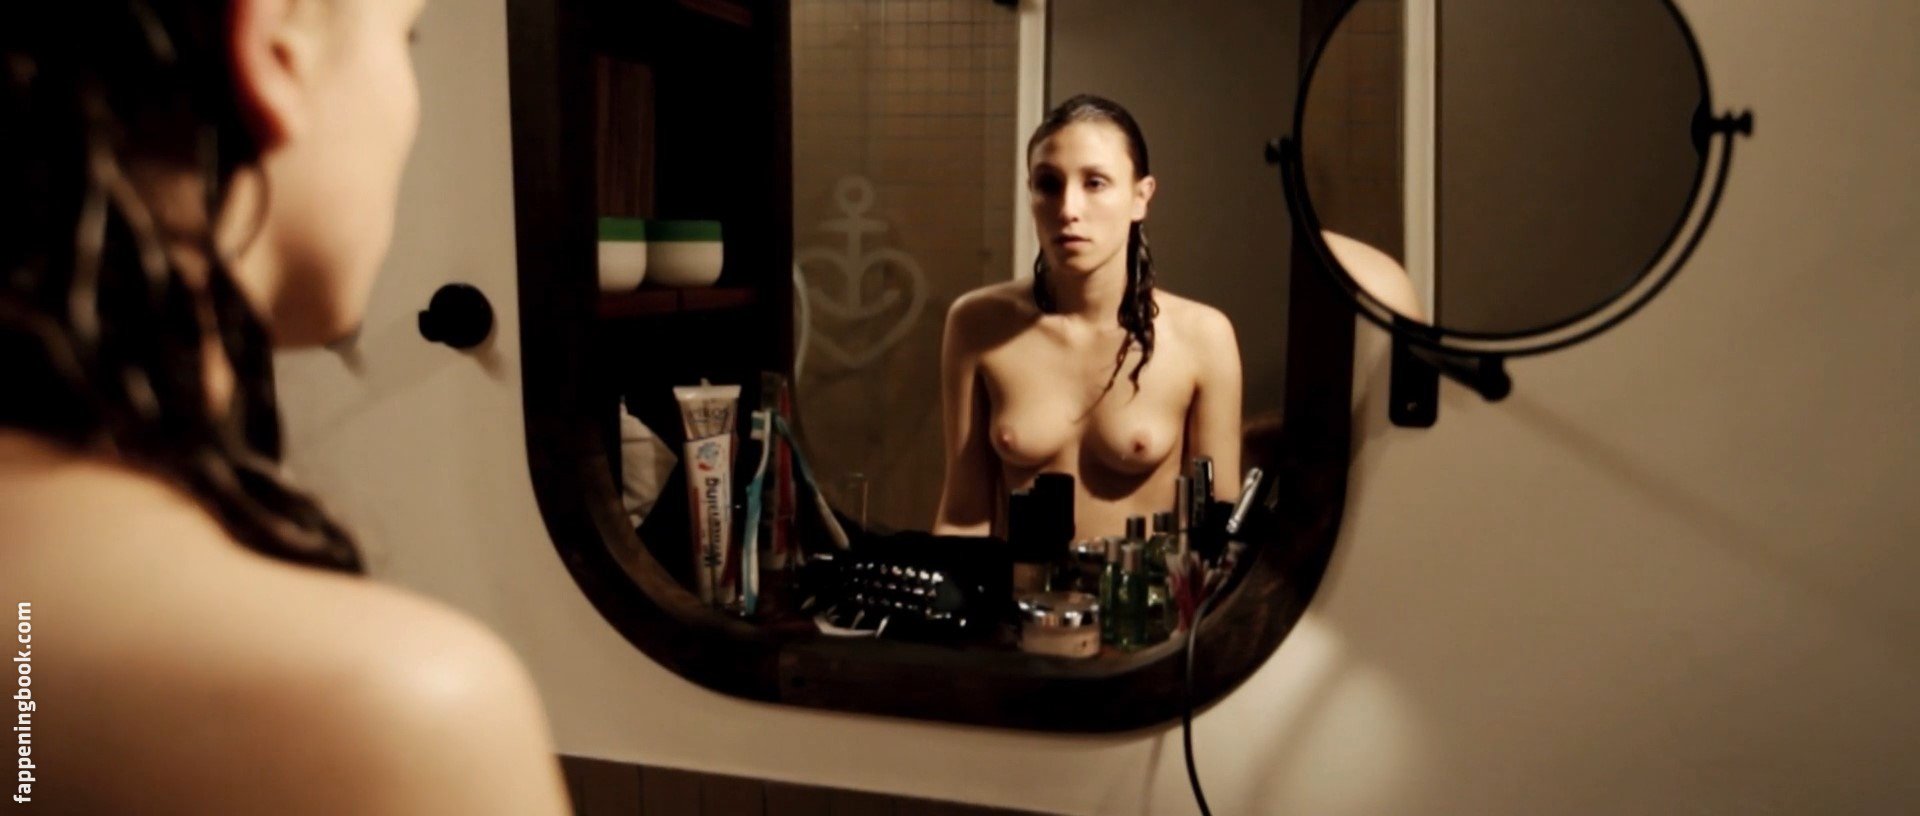 Nude Roles in Movies: Roulette (2013) Lena Steisslinger Nude Photos.